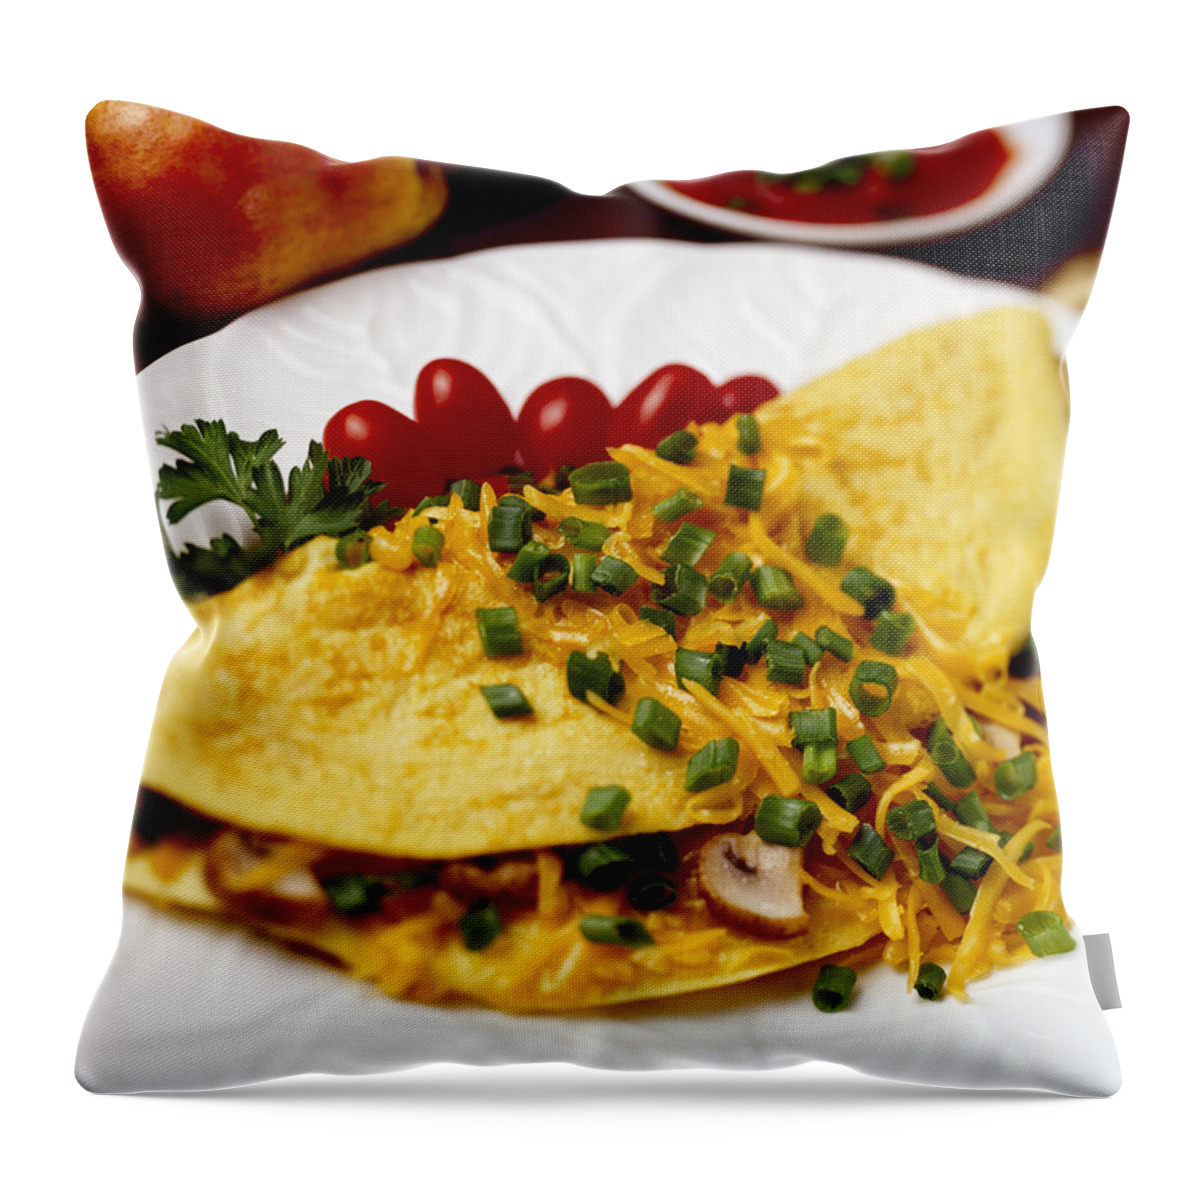 Prepared Throw Pillow featuring the photograph Food - Cheese And Mushroom Omelette by Ed Young